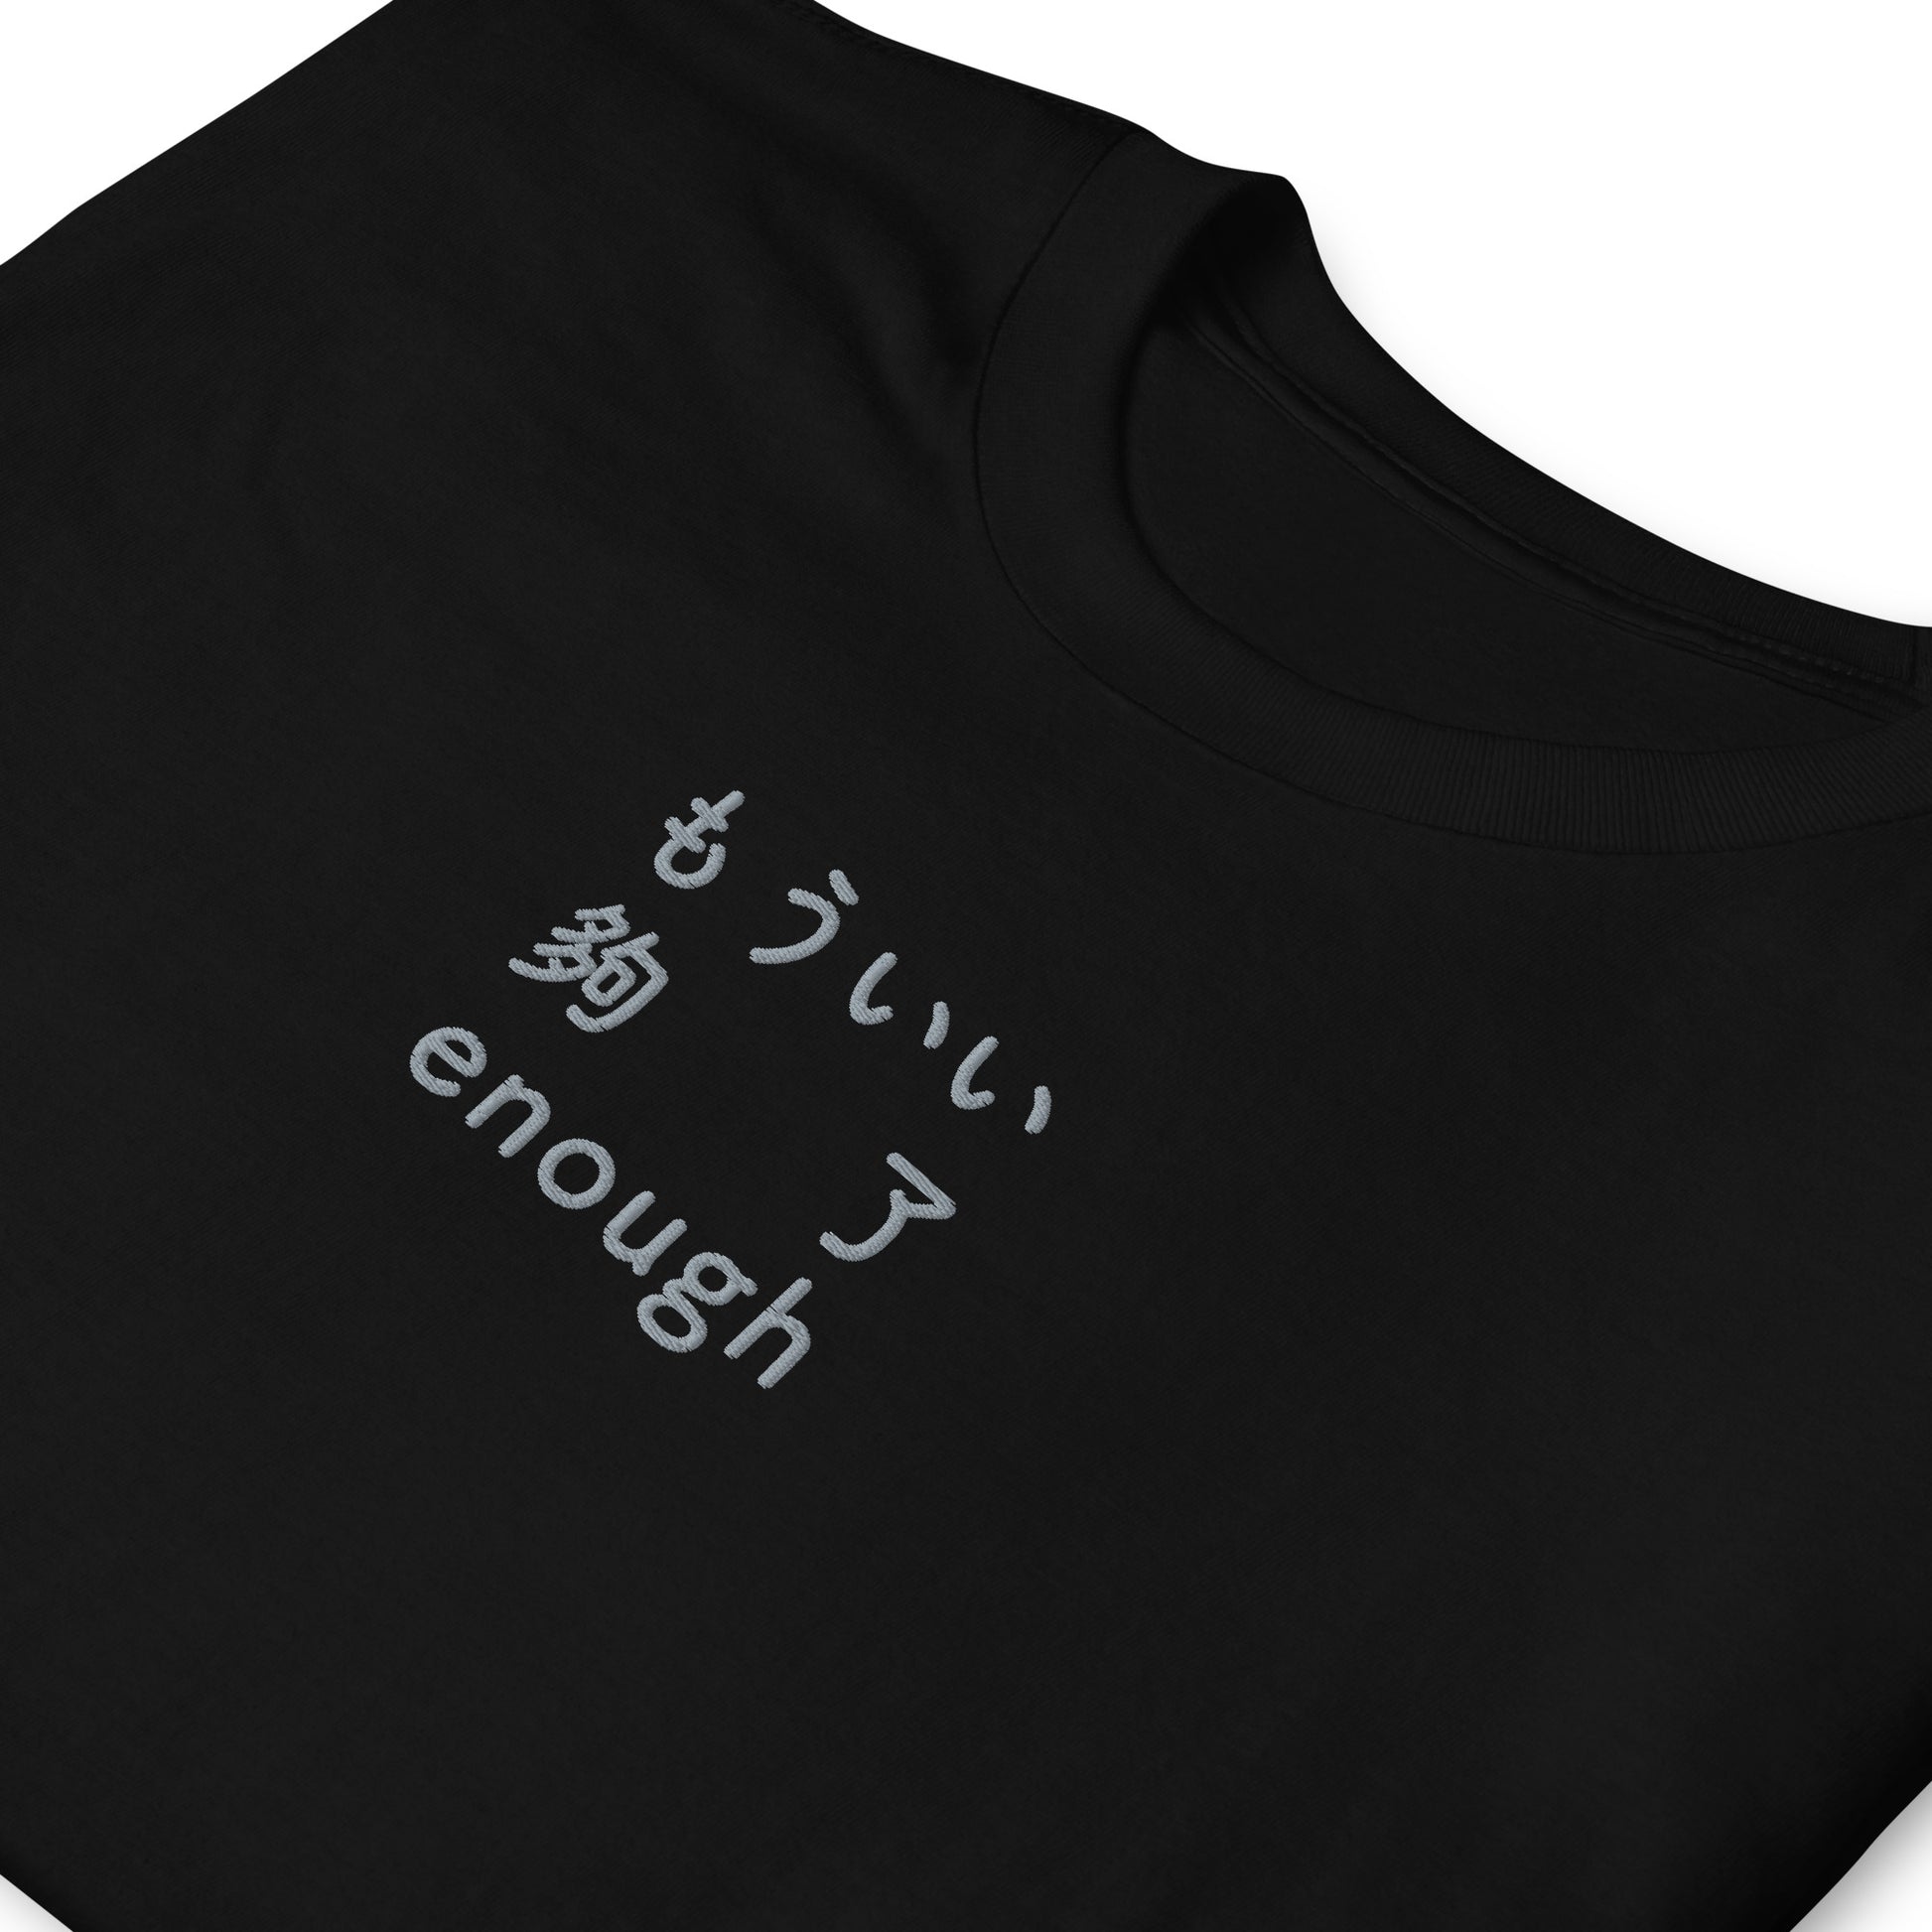 Black High Quality Tee - Front Design with an light gray Embroidery "Enough" in Japanese,Chinese and English